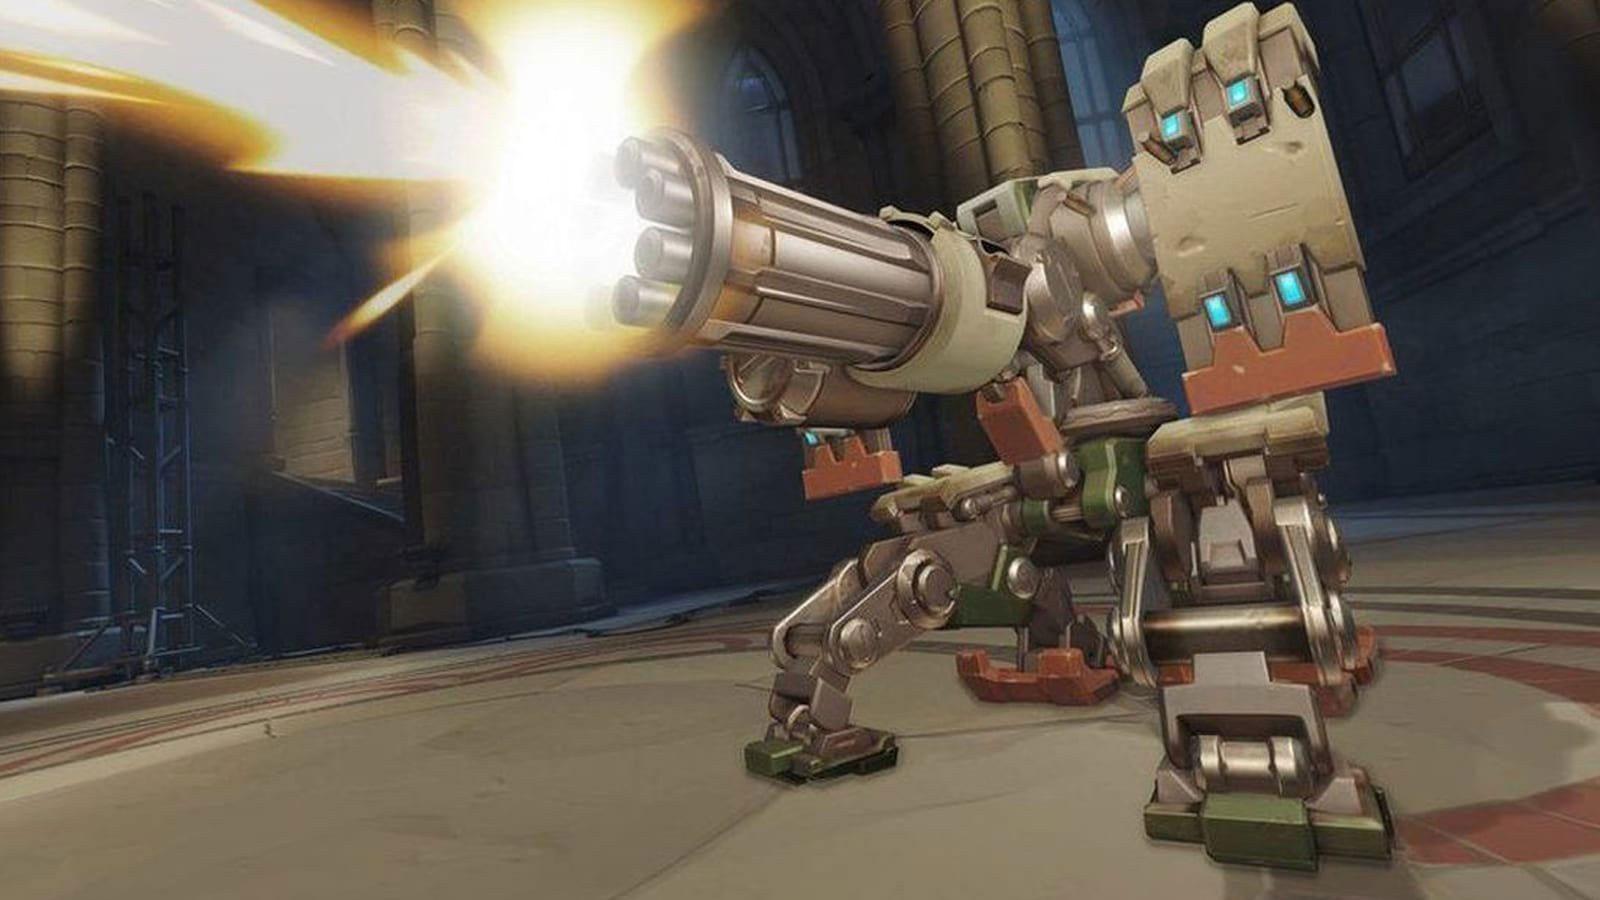 Bastion in turret form in Overwatch